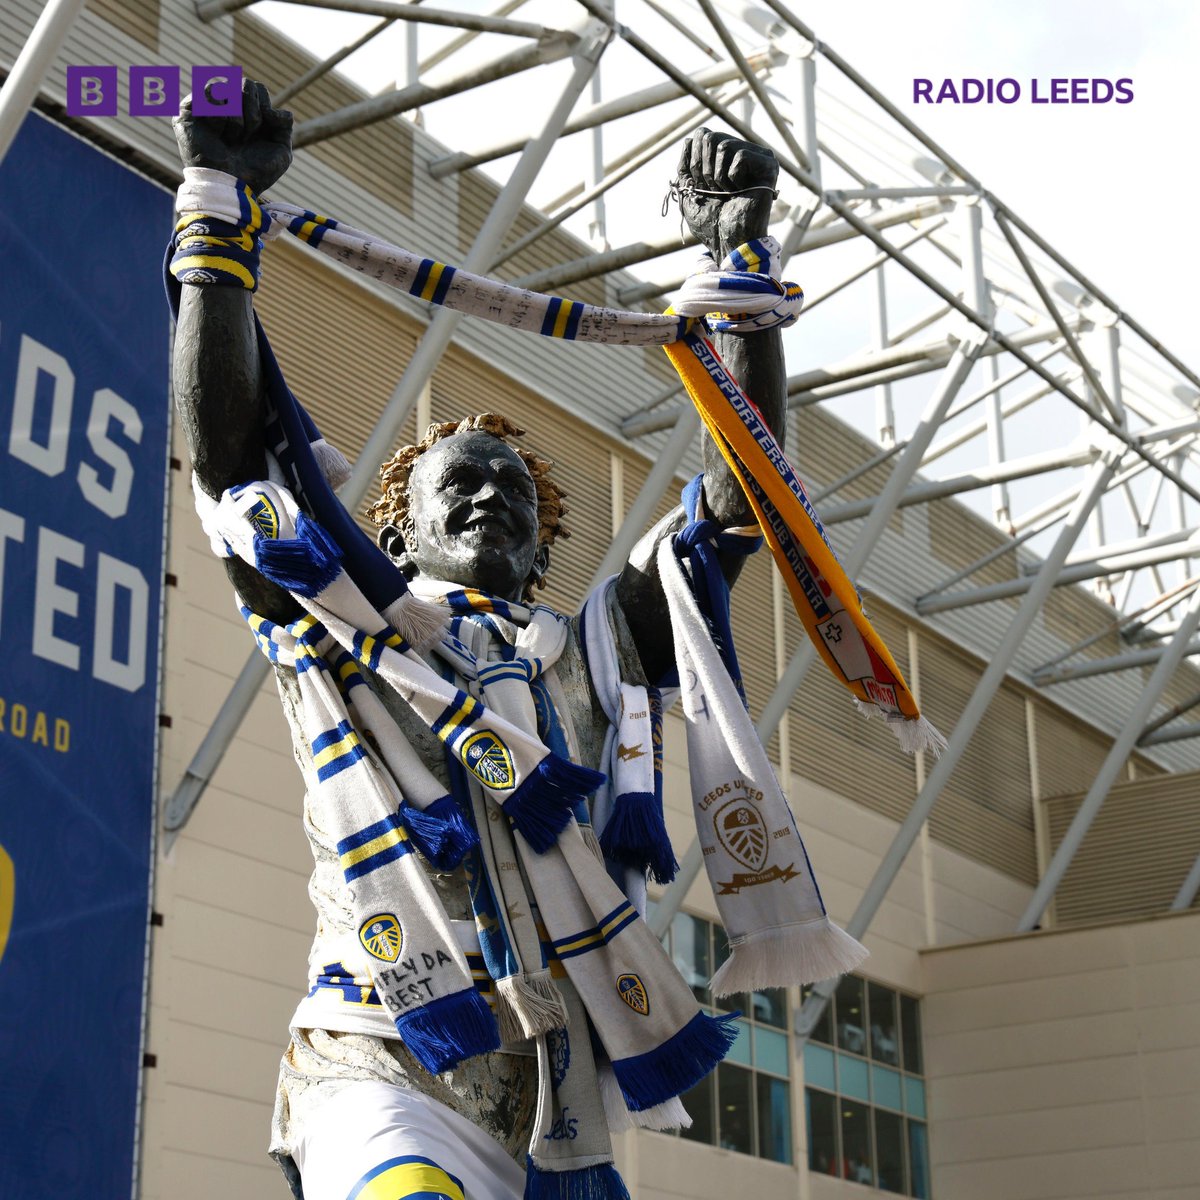 🗨️ 'He's an inspiration' Moves are afoot for a statue in Stirling to commemorate Leeds United's greatest ever player Billy Bremner. Alexander Gibb of the @scottishfsa explains the legacy of the former Scotland captain 🎧 ➡️ tinyurl.com/24ddpn6b #LUFC | #BBCFootball